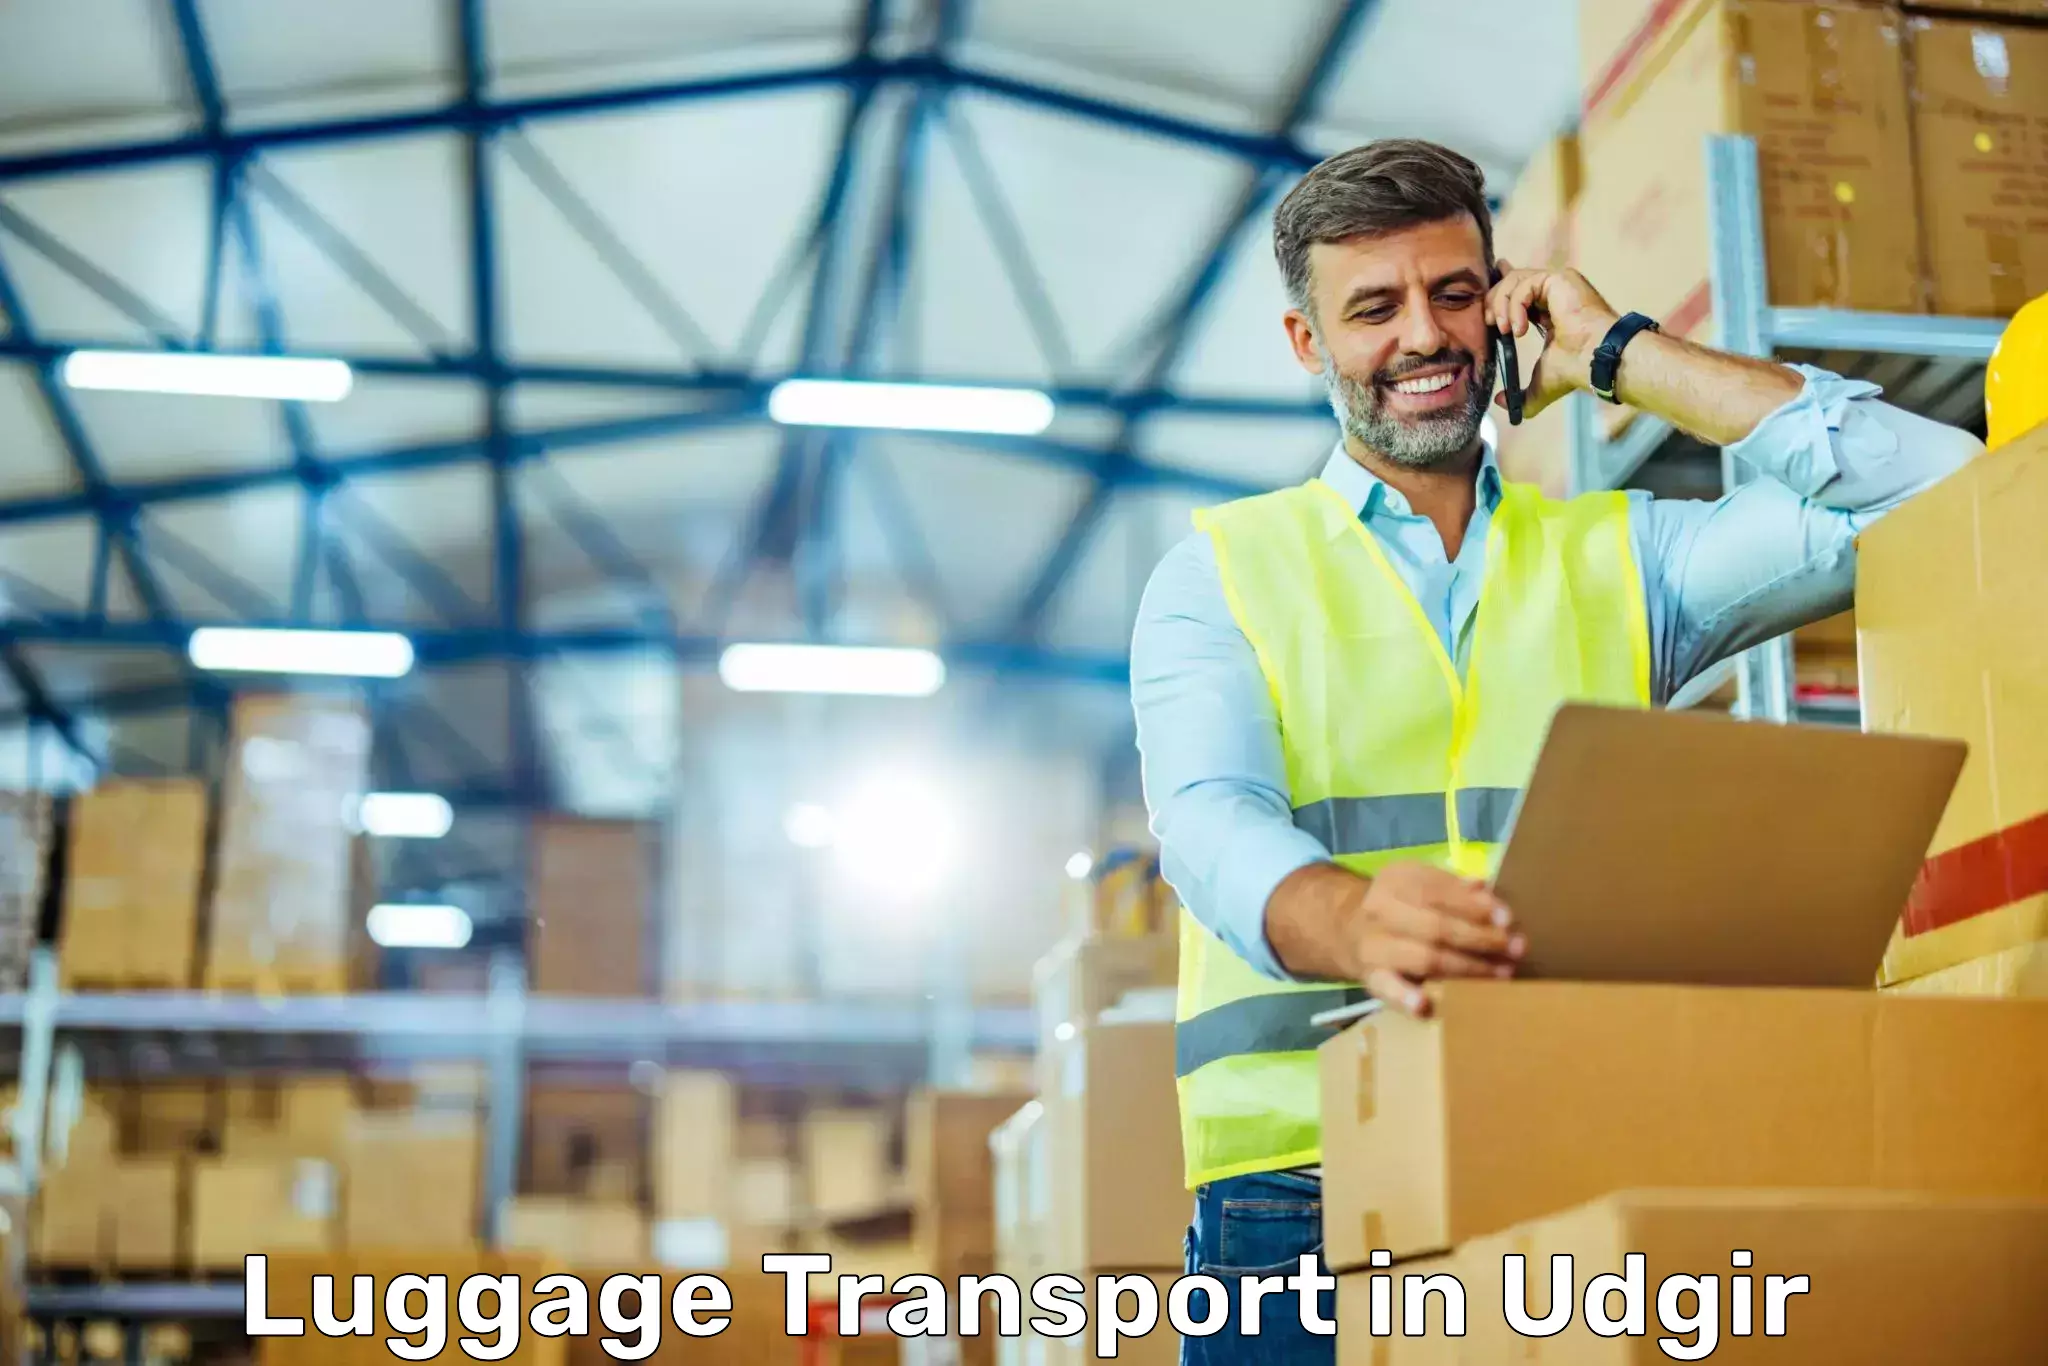 Luggage transport pricing in Udgir